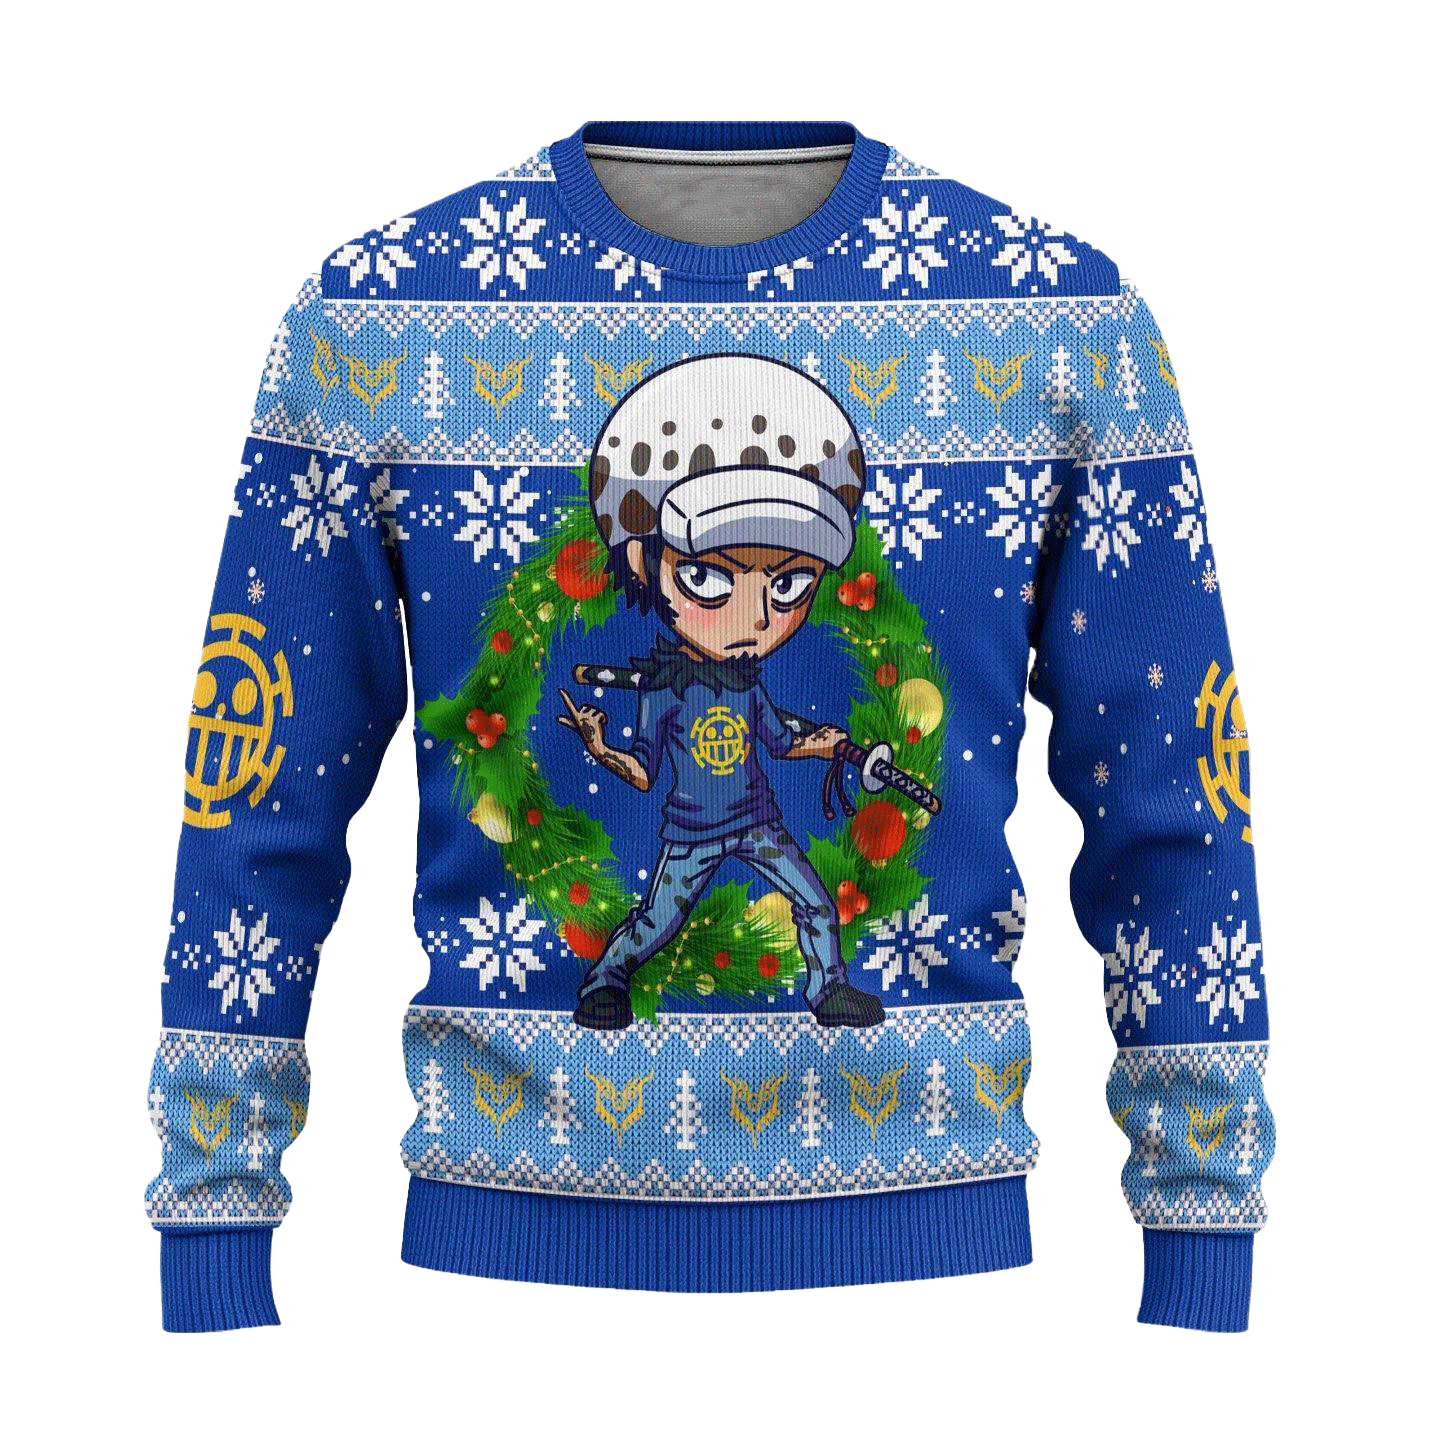 Law One Piece Anime Ugly Christmas Sweater Xmas Gift